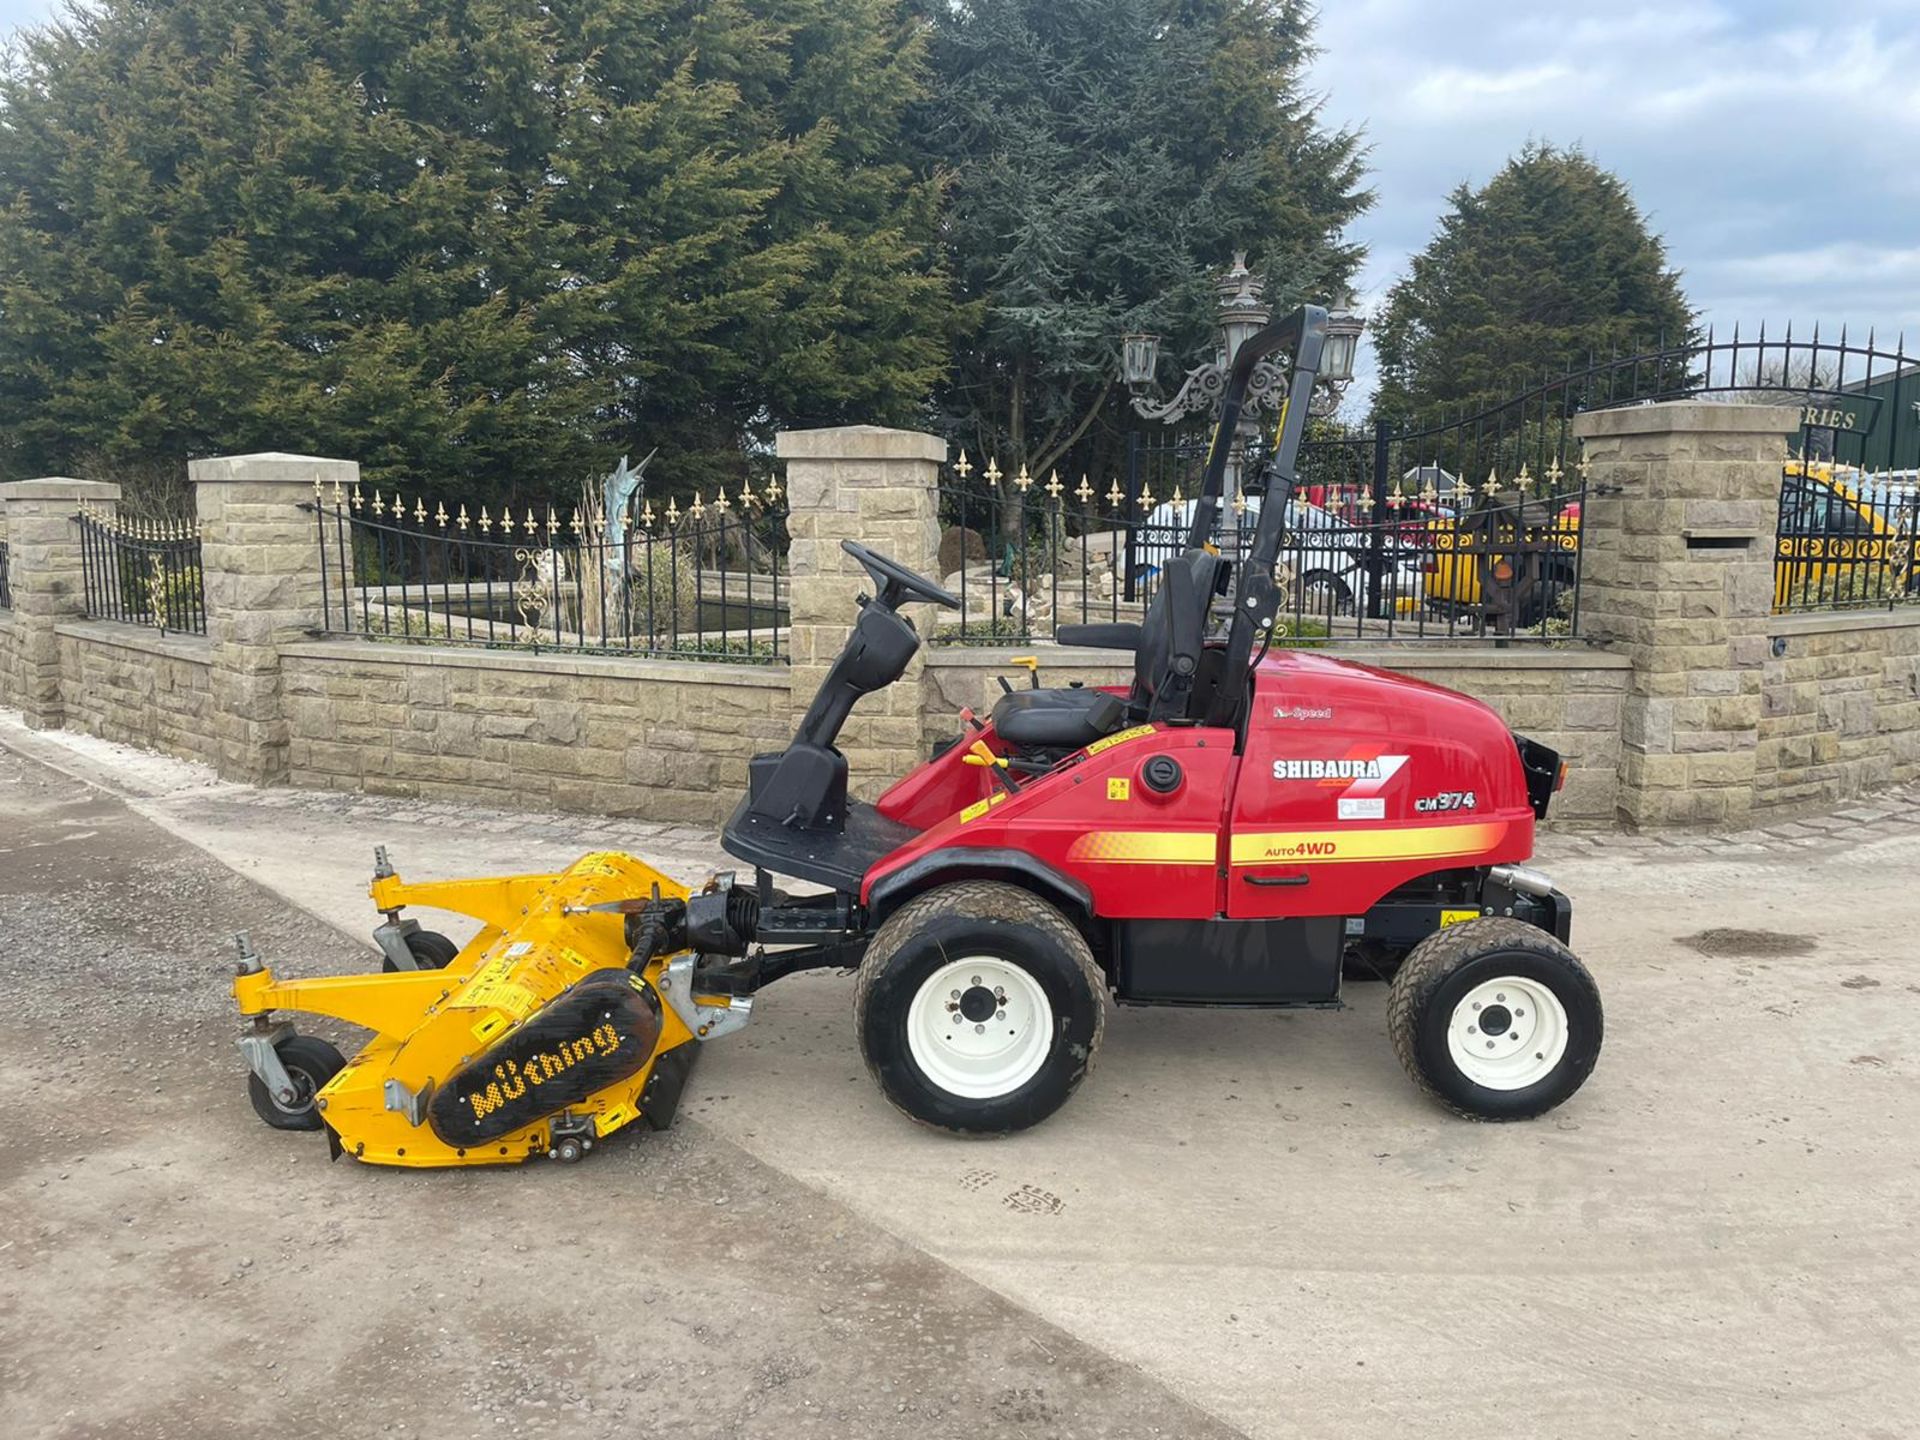 2014 SHIBAURA CM374 RIDE ON MOWER WITH A 2014 MUTHING FLAIL DECK, RUNS DRIVES AND CUTS *PLUS VAT*